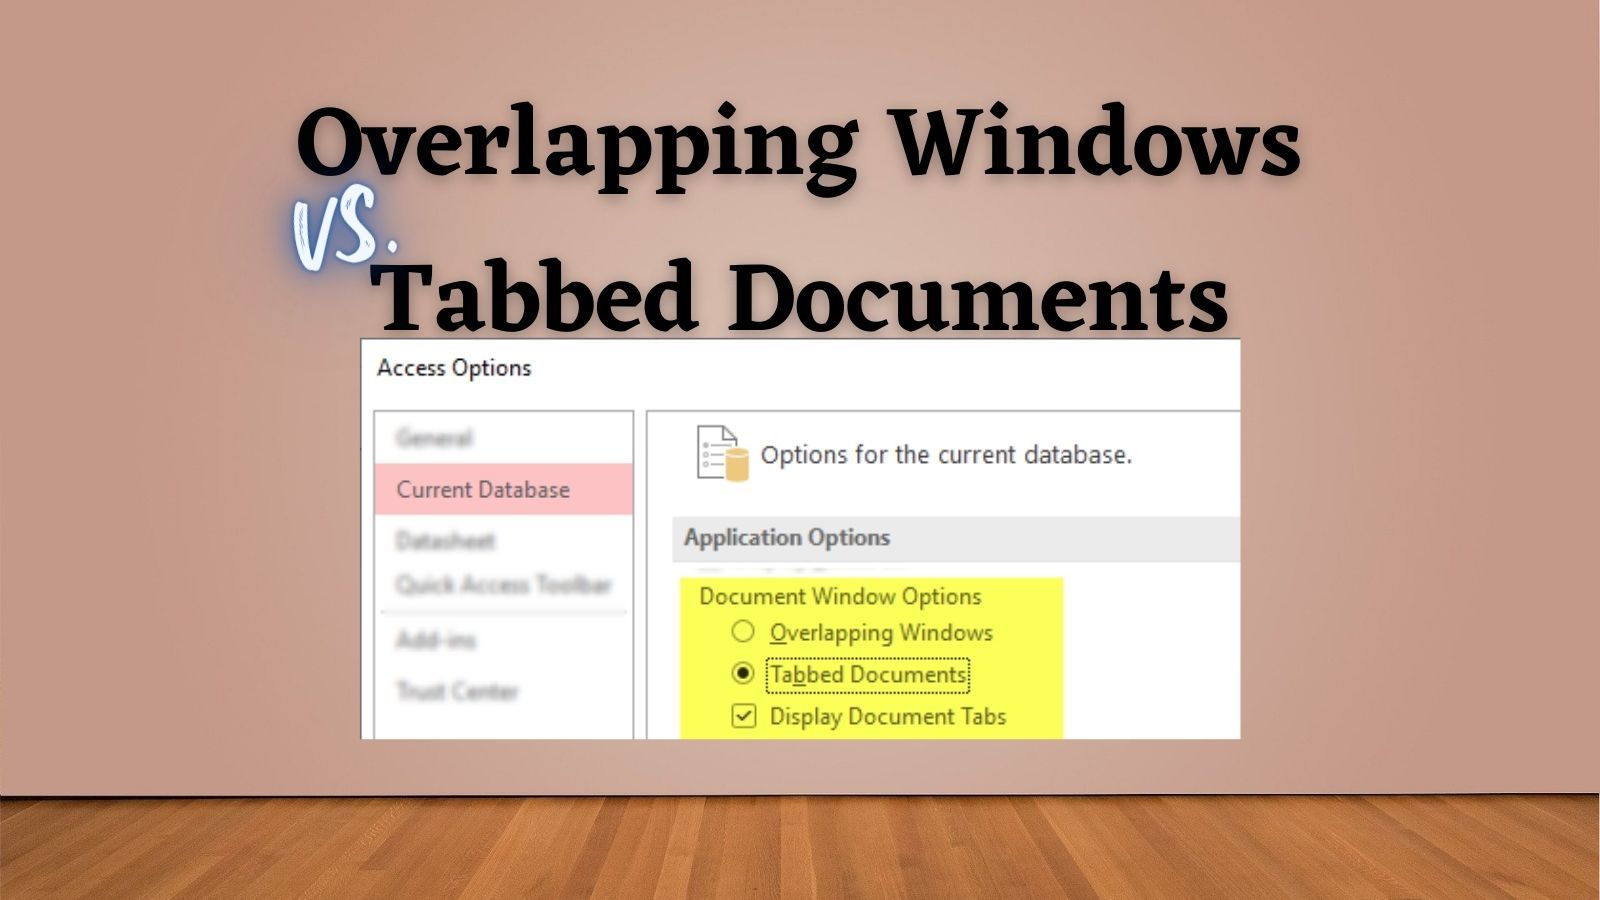 Overlapping Windows vs. Tabbed Documents